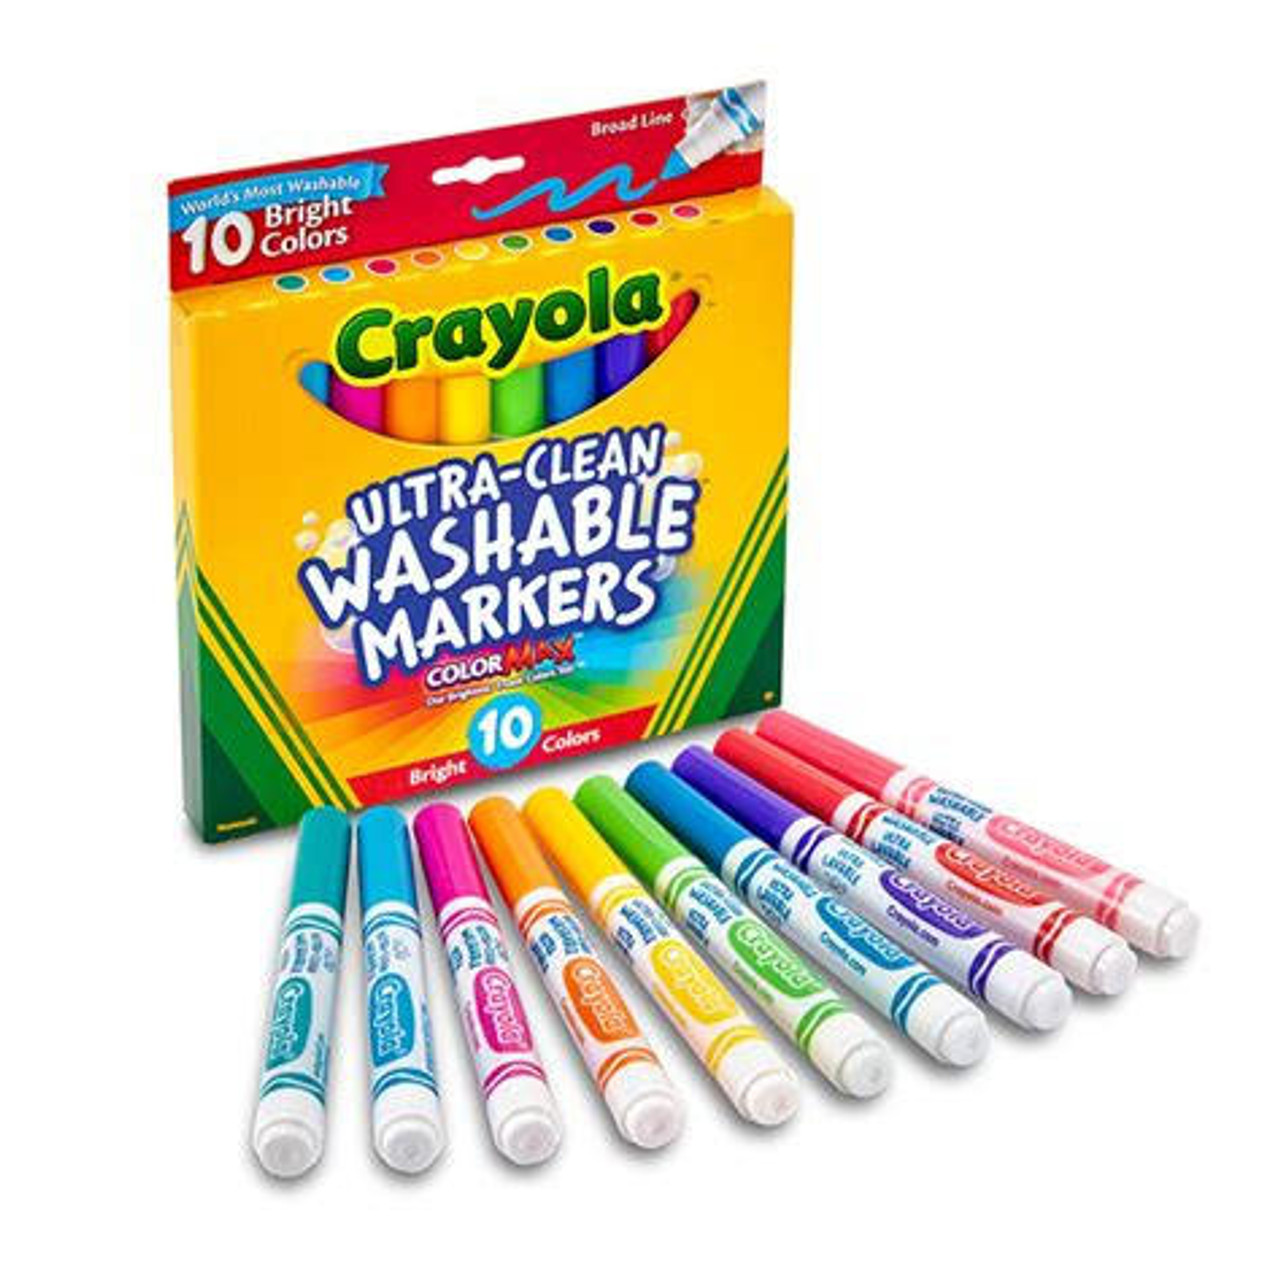 https://cdn11.bigcommerce.com/s-9uf88xhege/images/stencil/1280x1280/products/13439/64457/macphersons-broad-washable-markers-10-color-bright-shades__52650.1699998941.jpg?c=1?imbypass=on